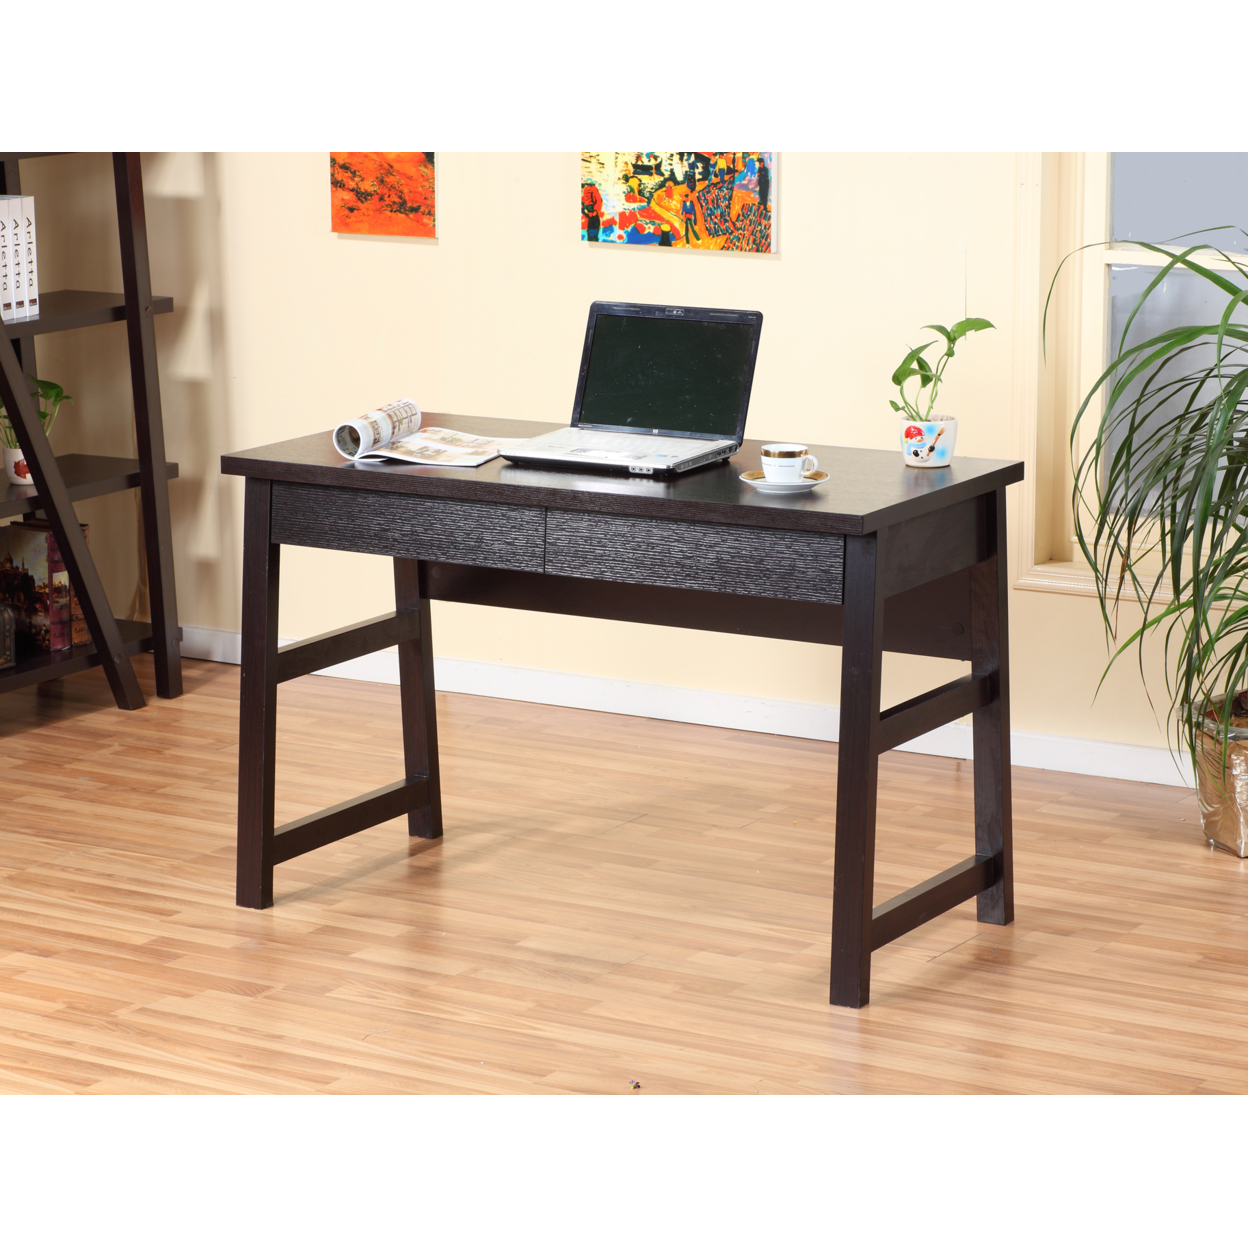 Wooden Desk With Two Drawers, Red Cocoa Brown- Saltoro Sherpi